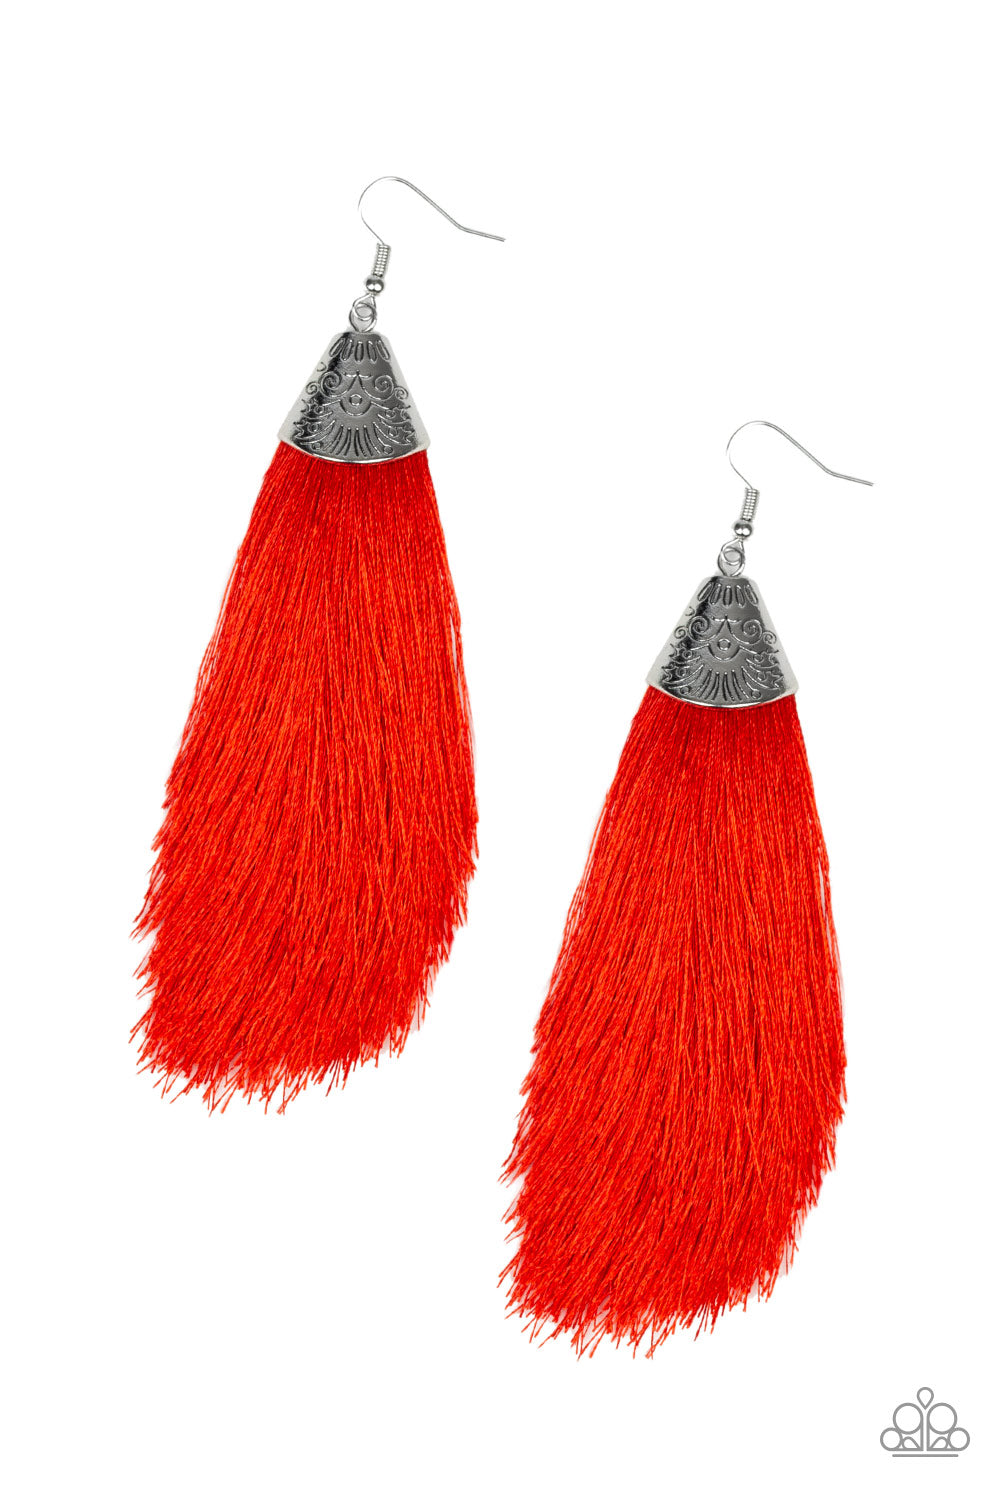 Paparazzi Tassel Temptress - red earrings - paparazzi jewelry images